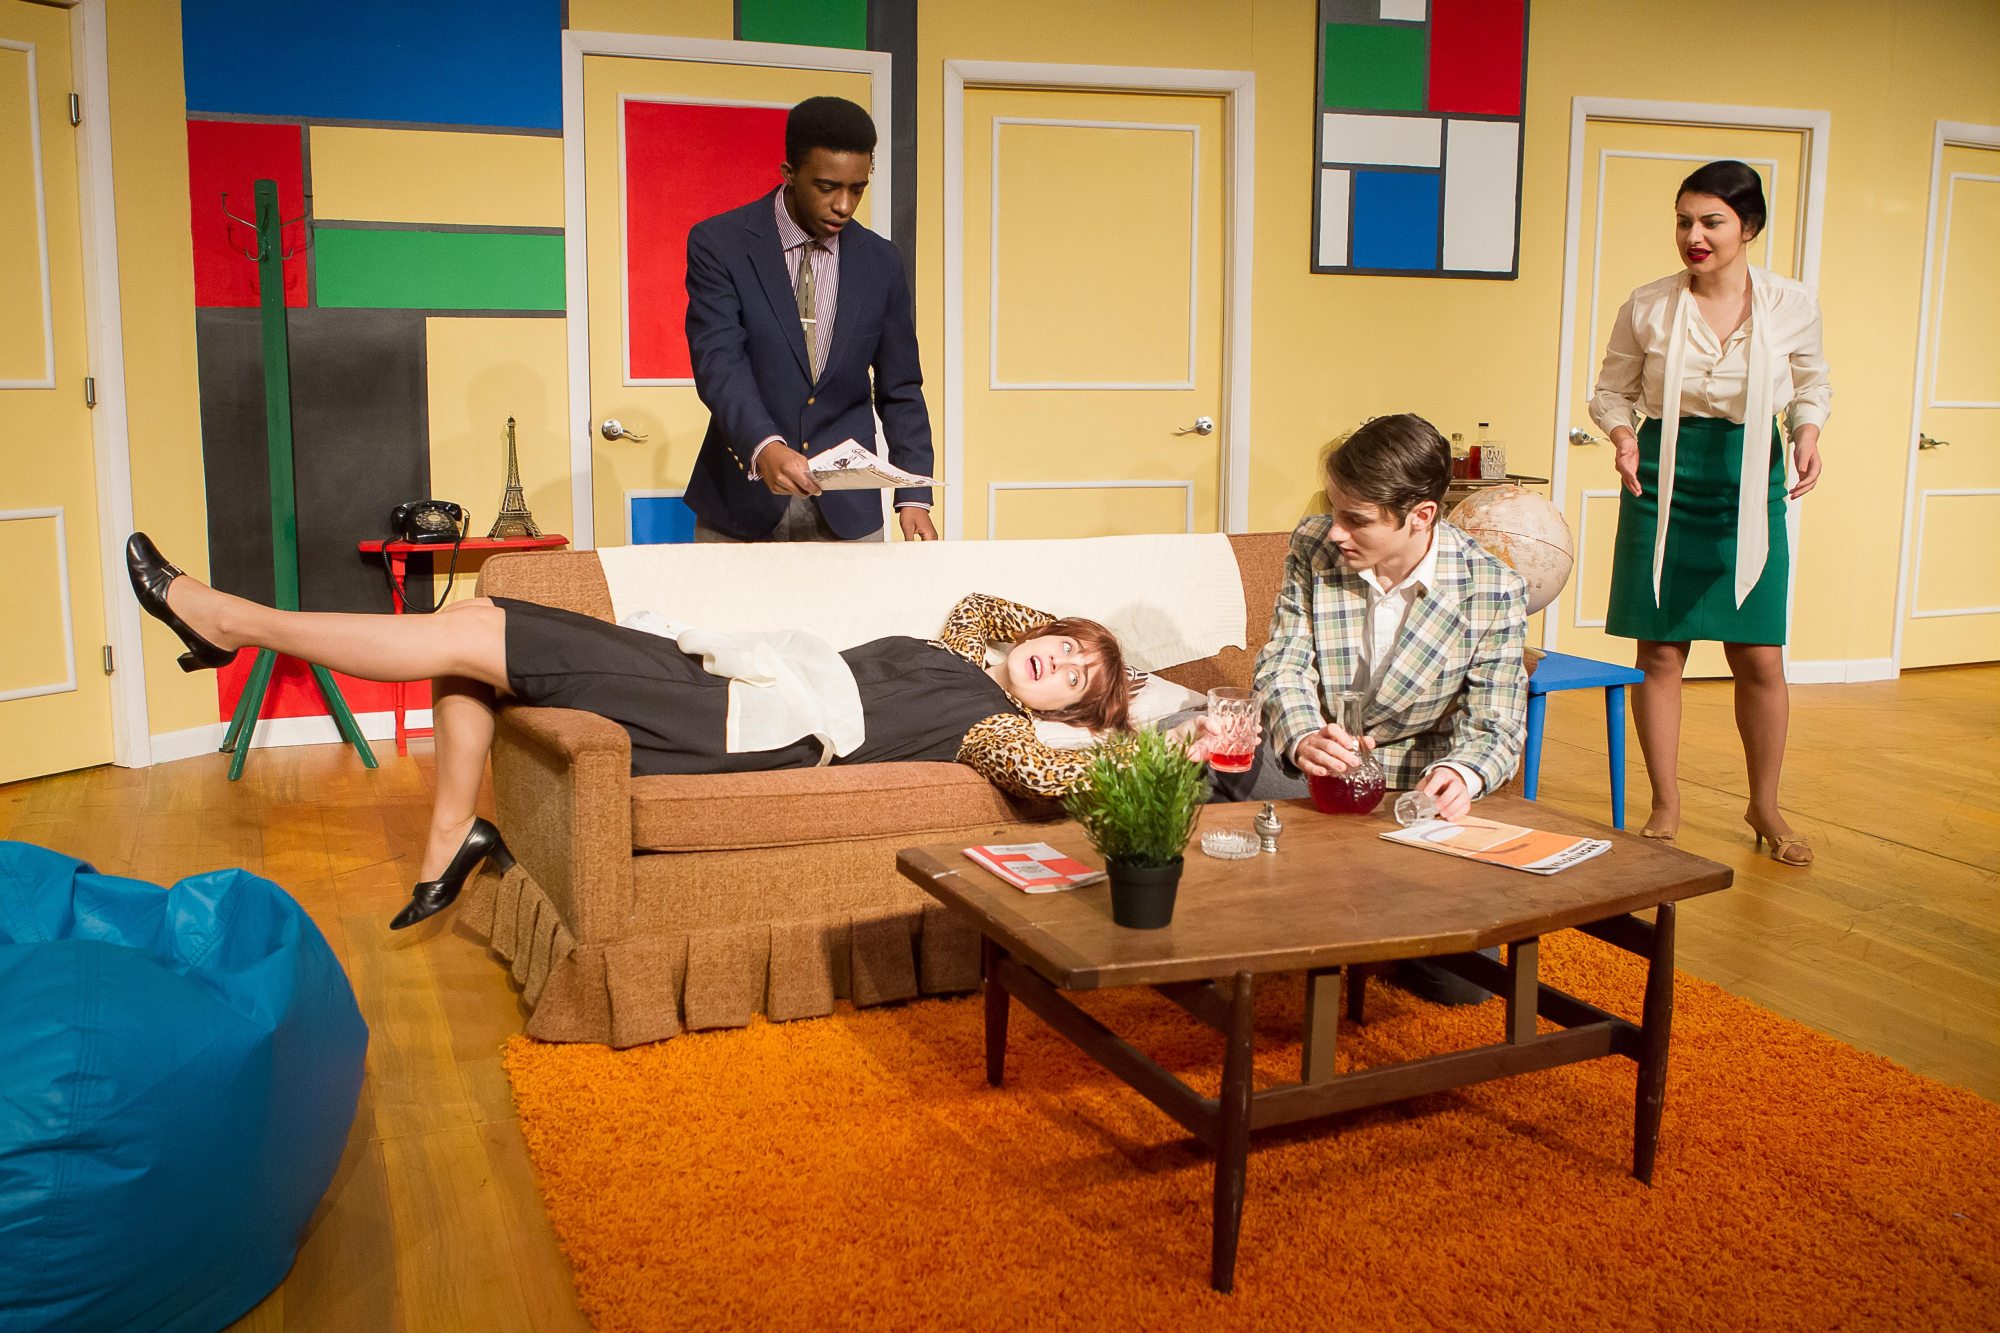 student actors on stage in a colorful living room acting out a scene, one actress is laying on the couch in the middle with another actress sitting next to her. Two actors are standing near the couch. 